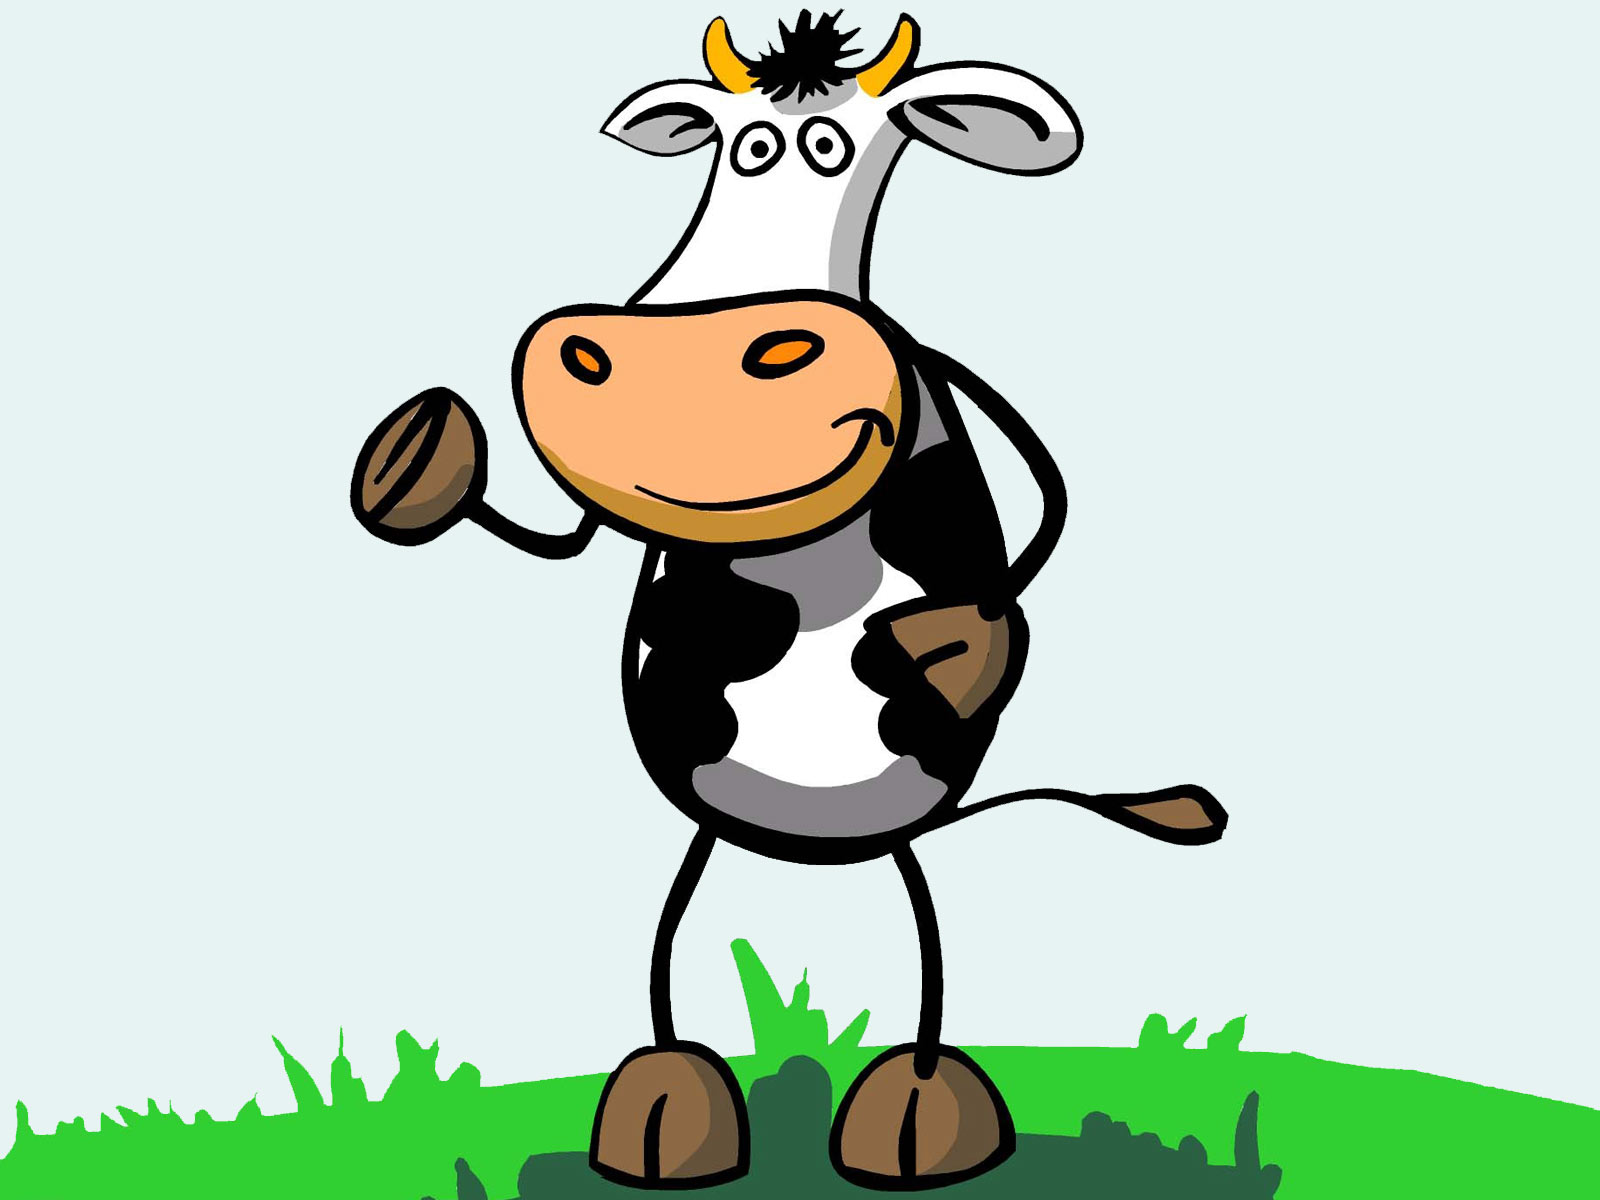 1000+ images about Cow Lovers | Cartoon cow, Cartoon ...